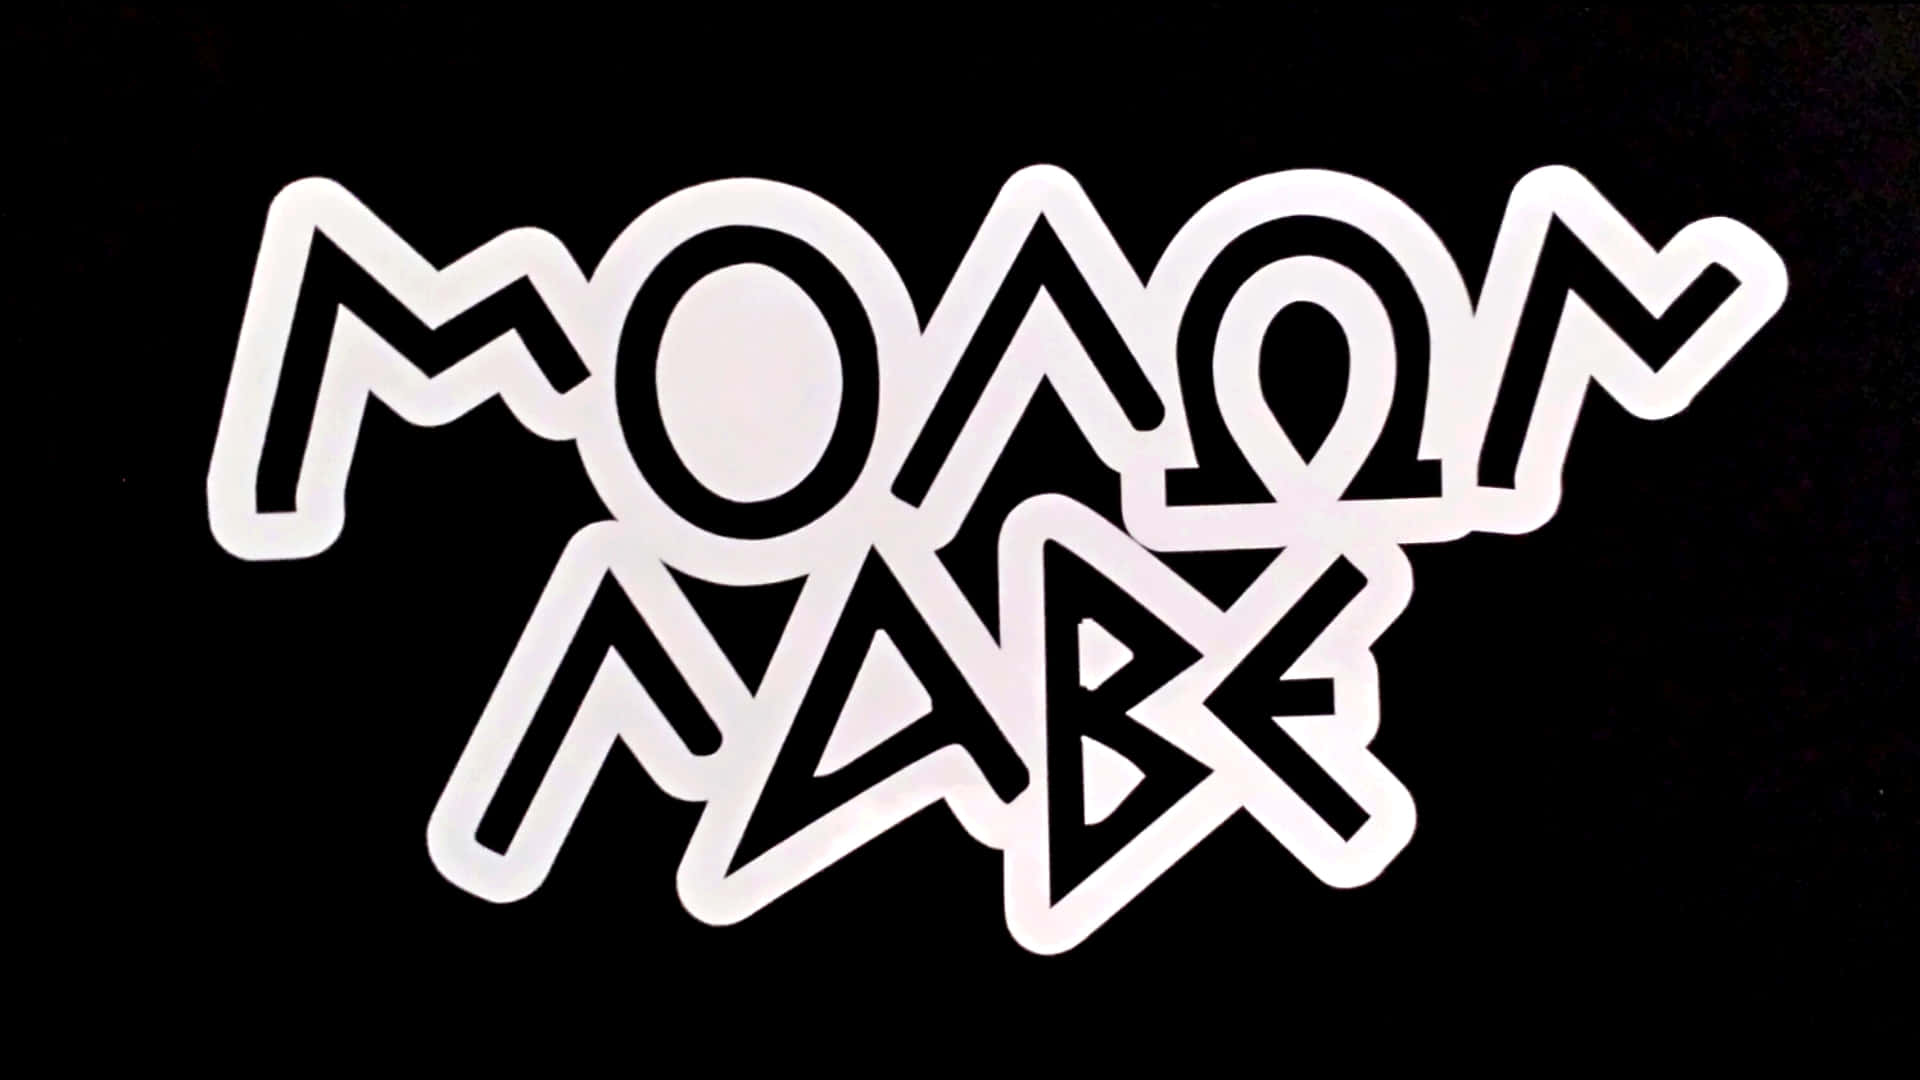 A Black And White Sticker With The Word Moom Adam Wallpaper